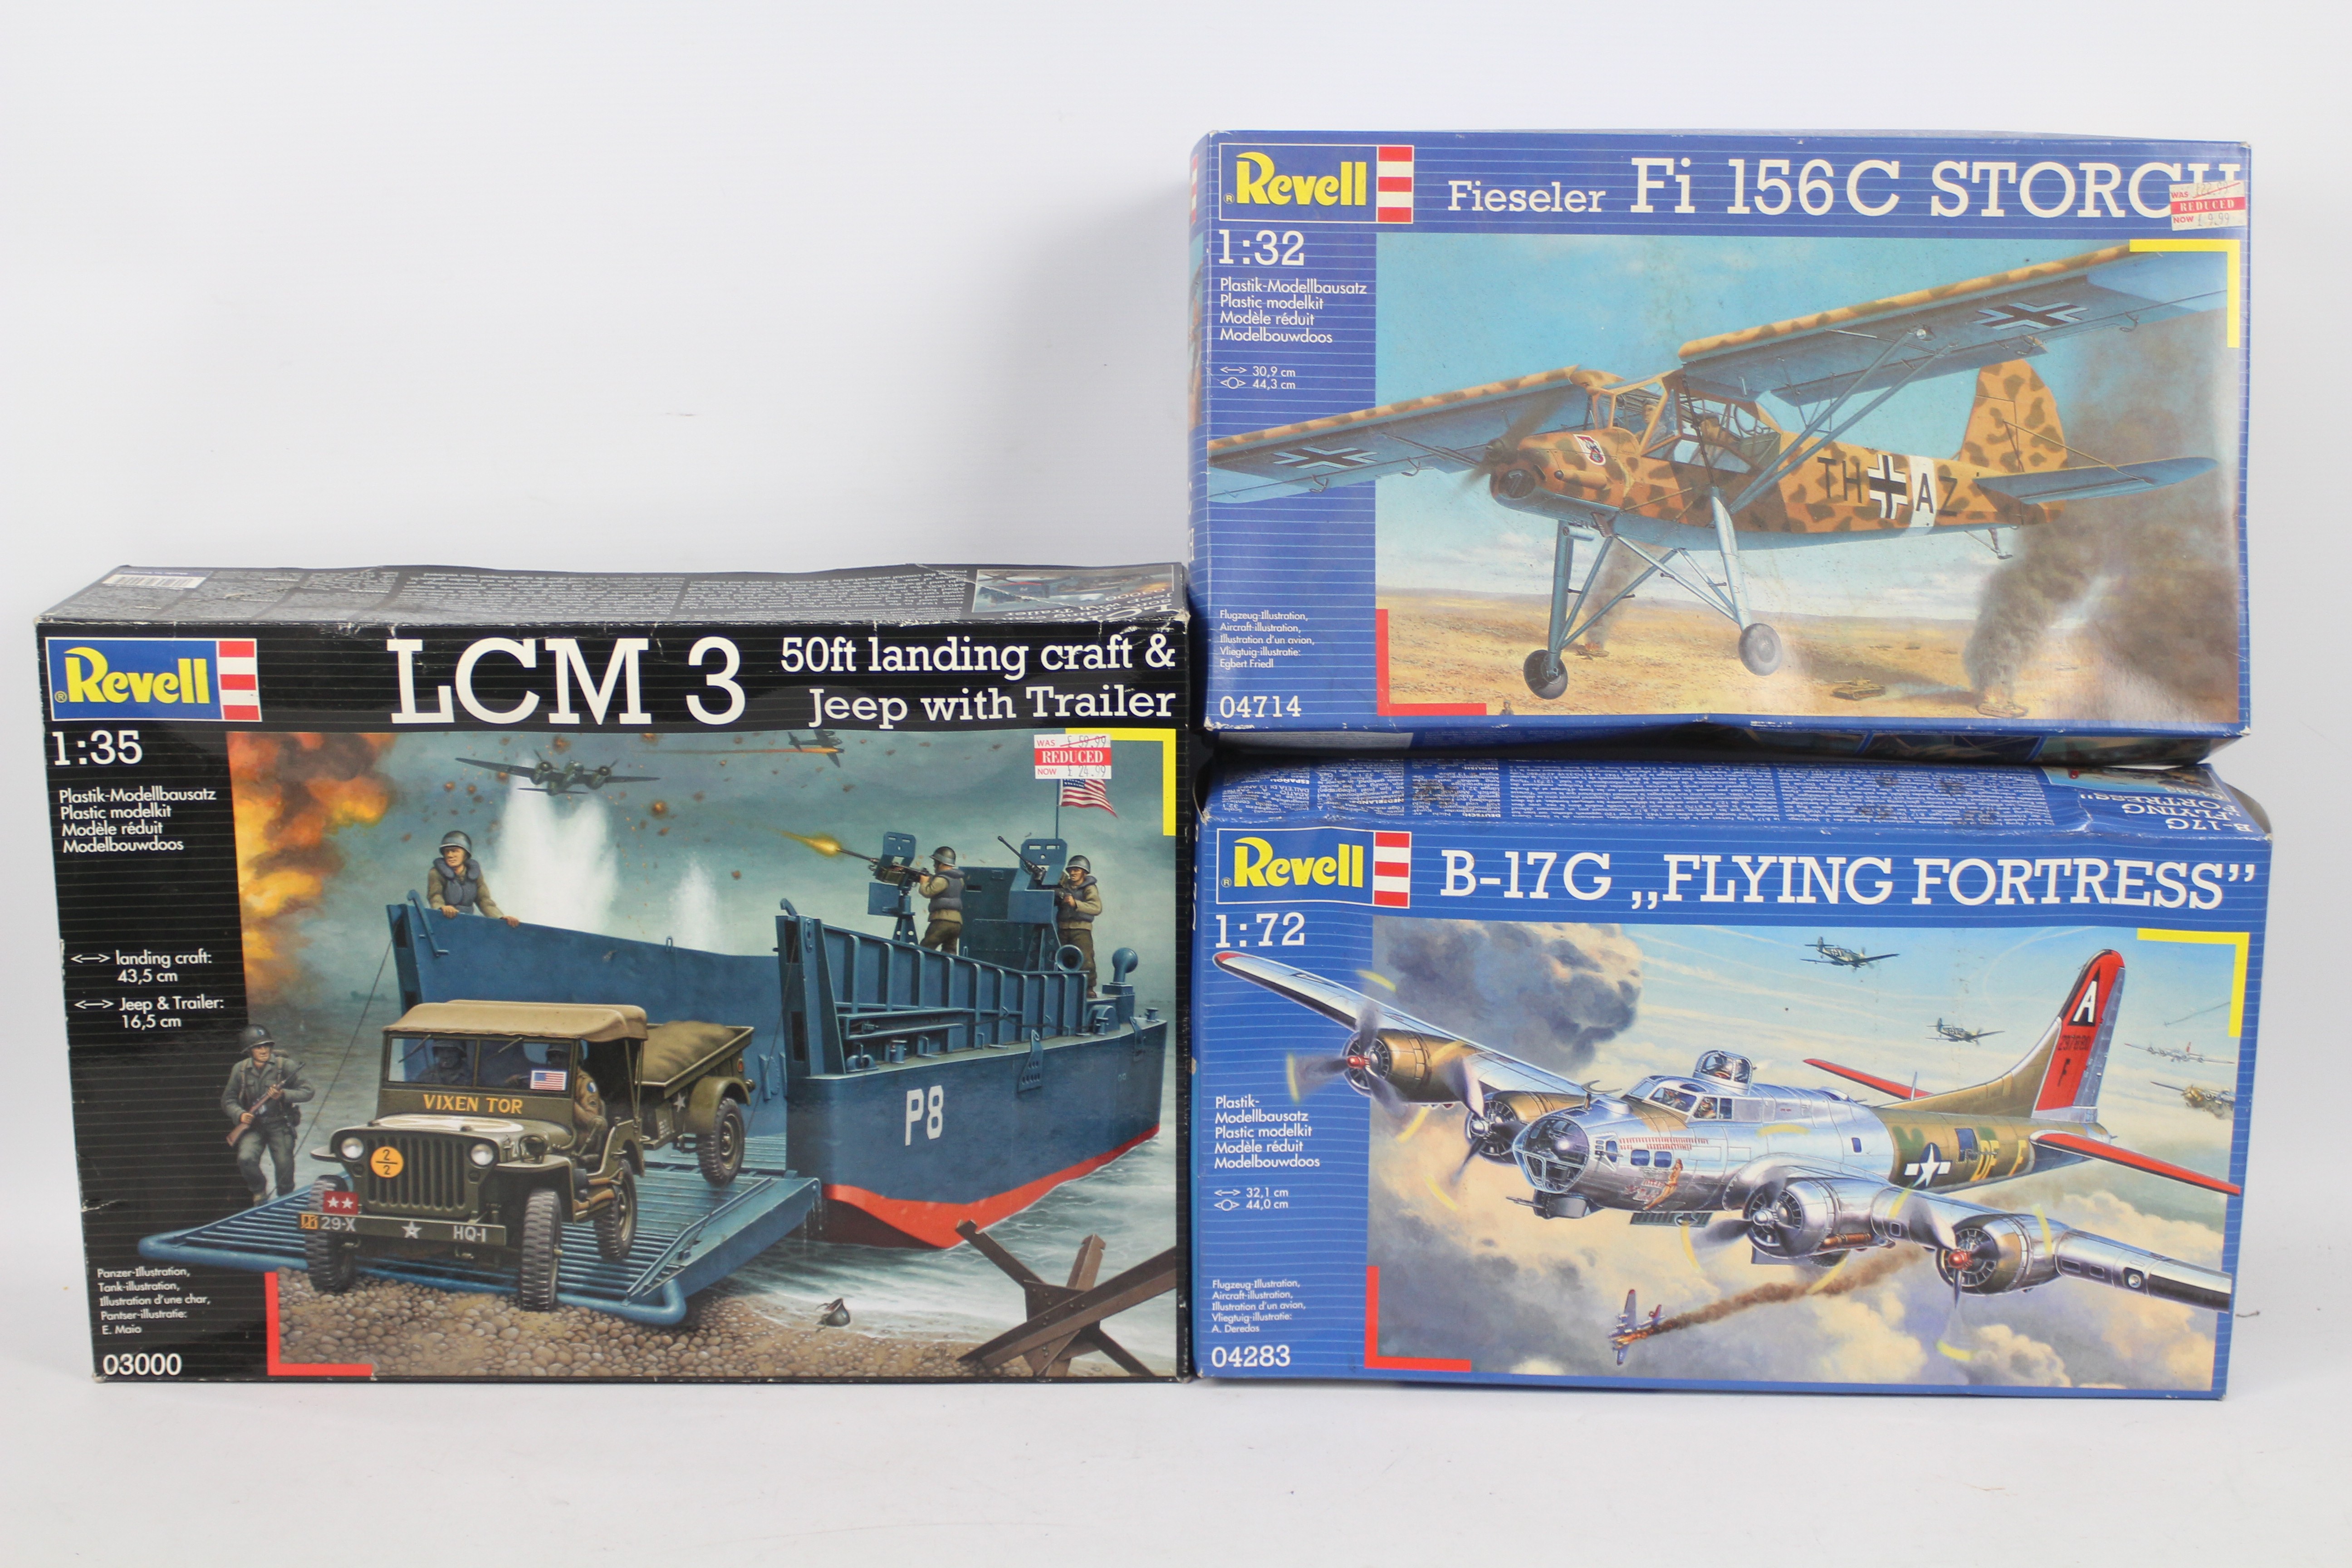 Revel - Three boxed plastic model kits in various scales from Revell.